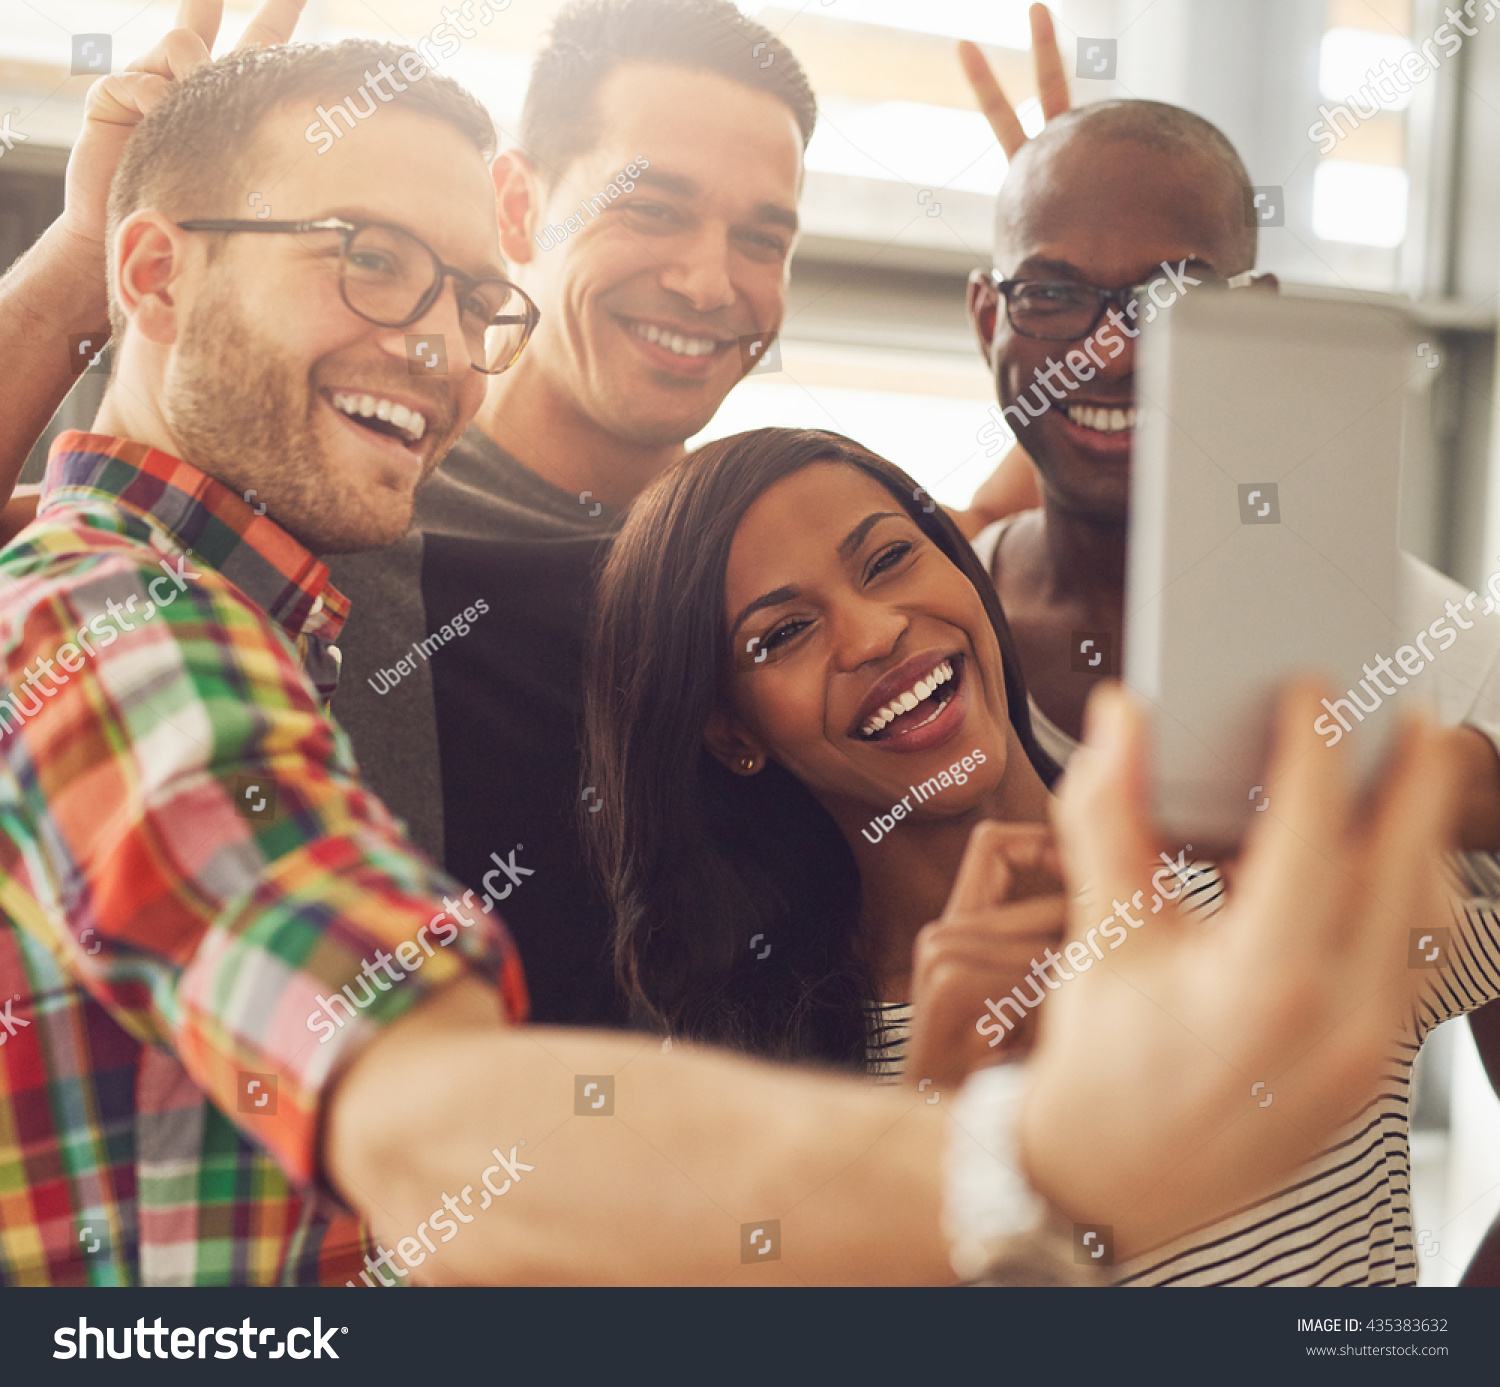 2,247 Funny team photos Images, Stock Photos & Vectors | Shutterstock